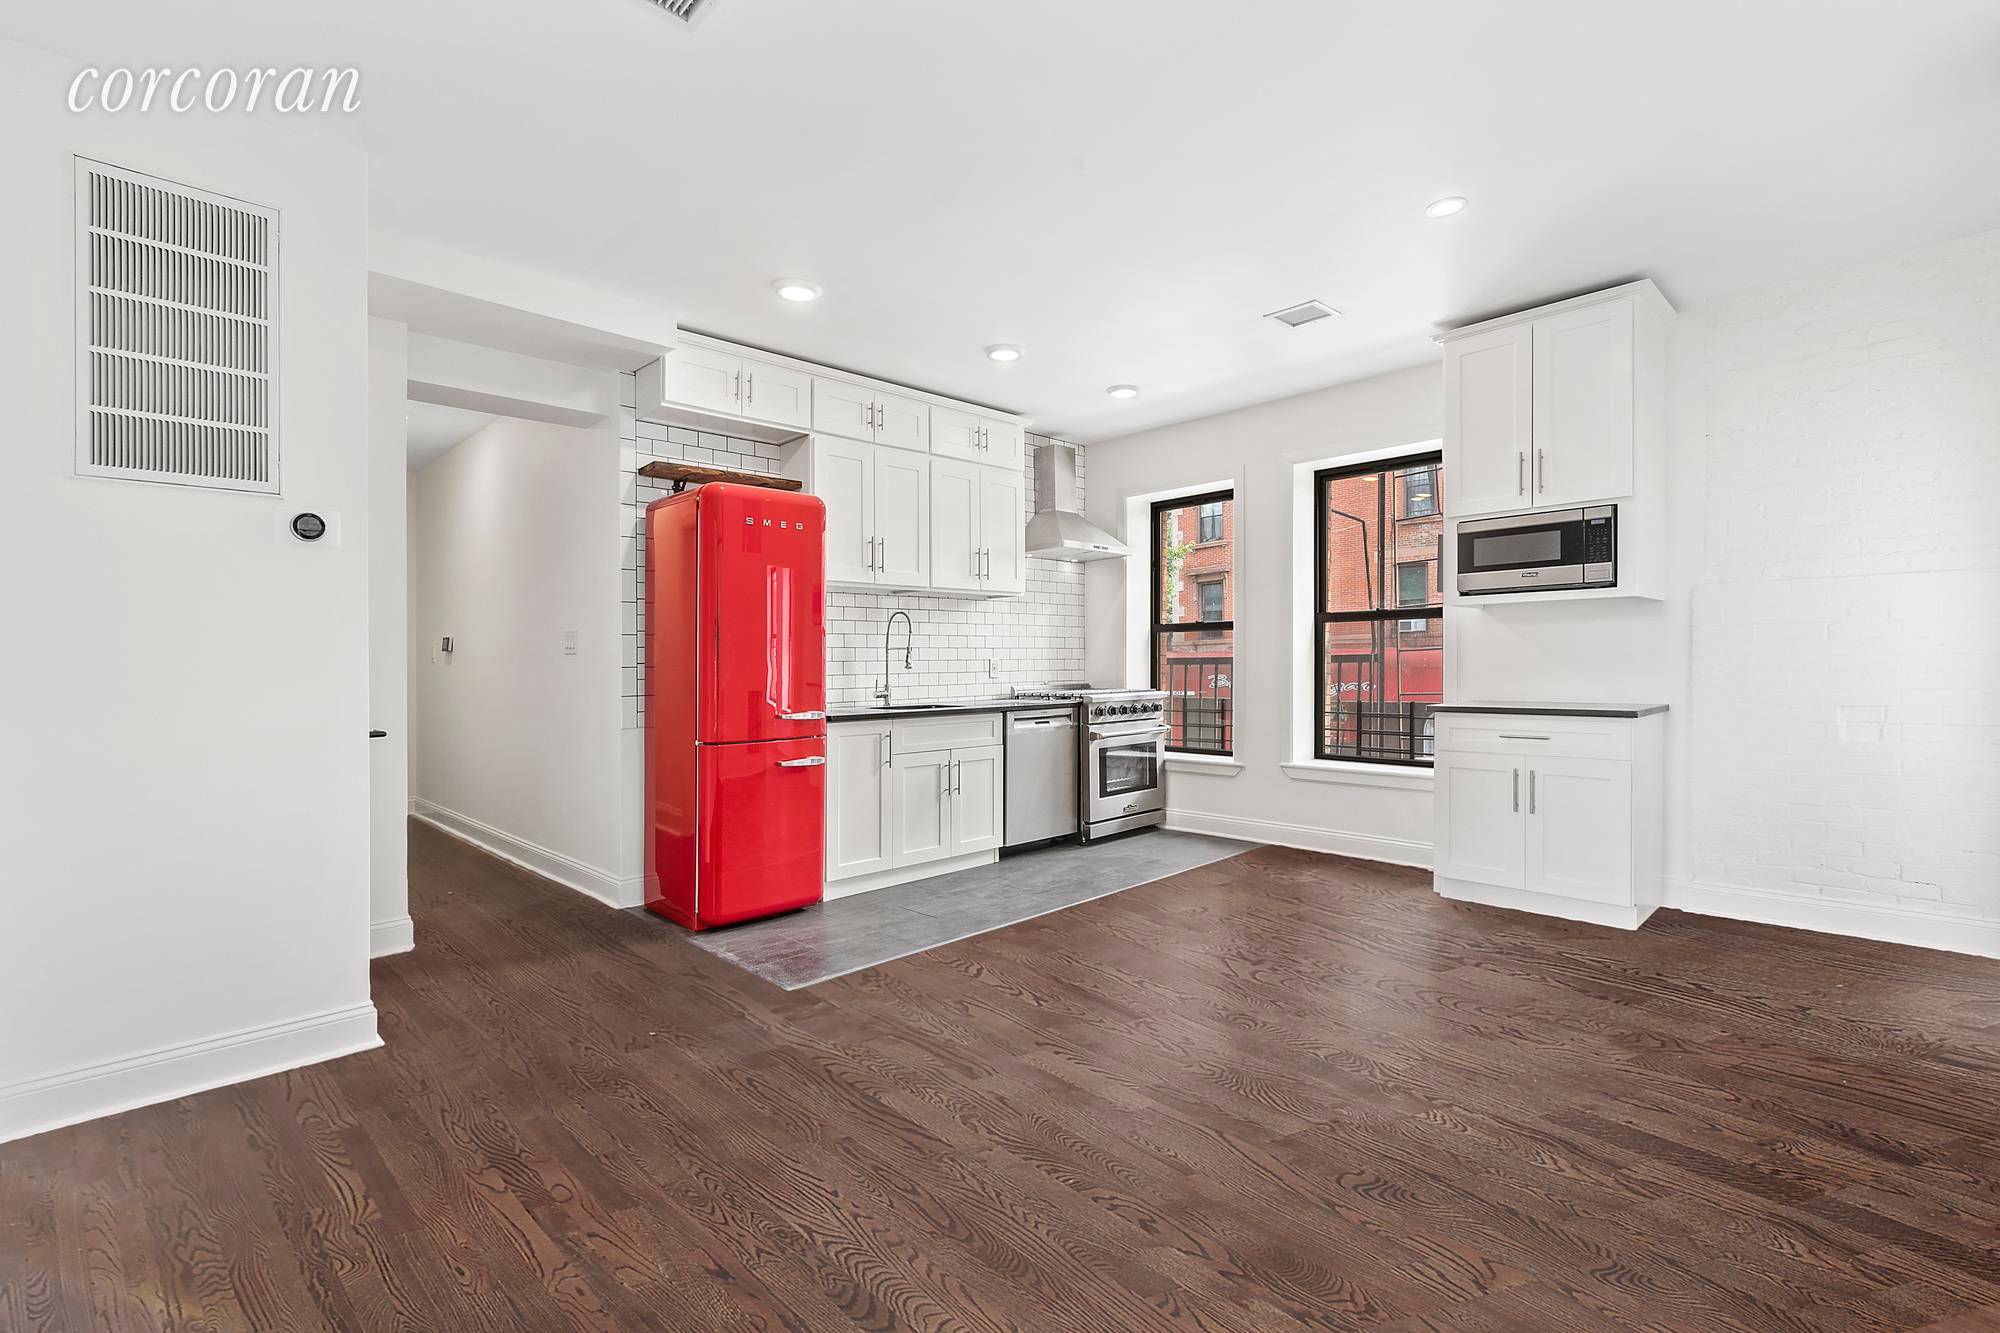 320 Macon Street 2B is a 770 sq ft loft like two bedroom, one bathroom home in a newly converted condo building in the heart of Bed Stuy.